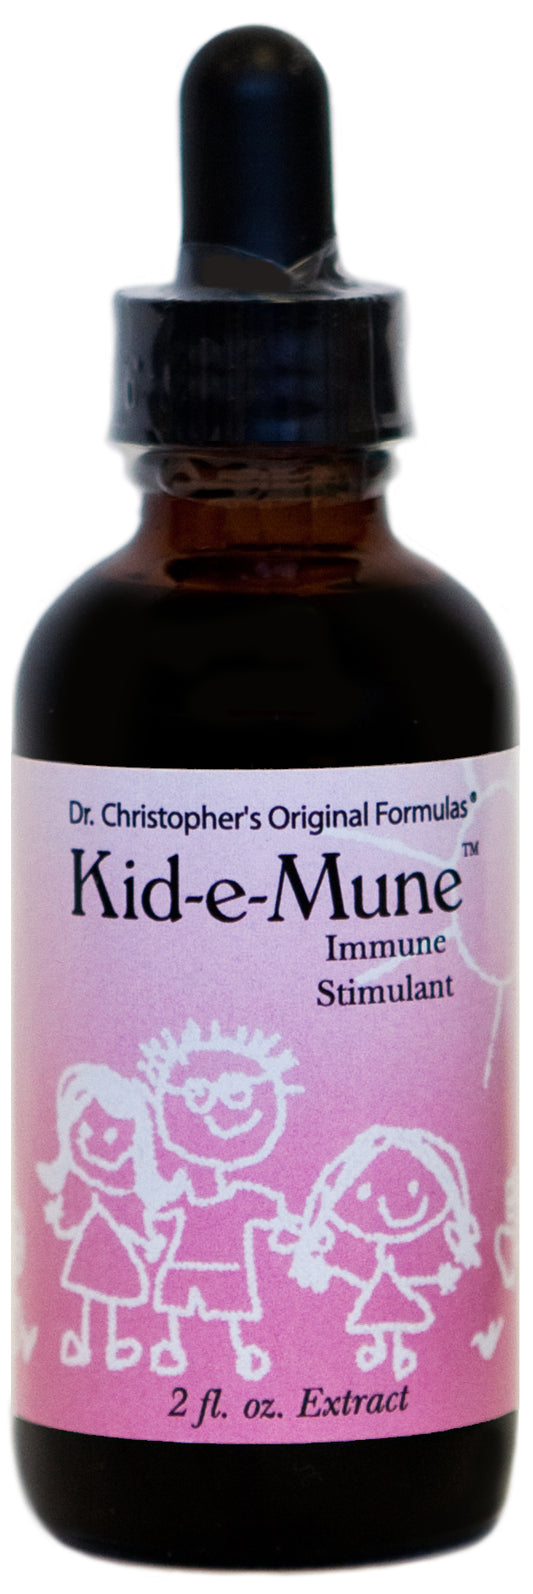 Dr. Christopher's Kid-e-Mune Extract